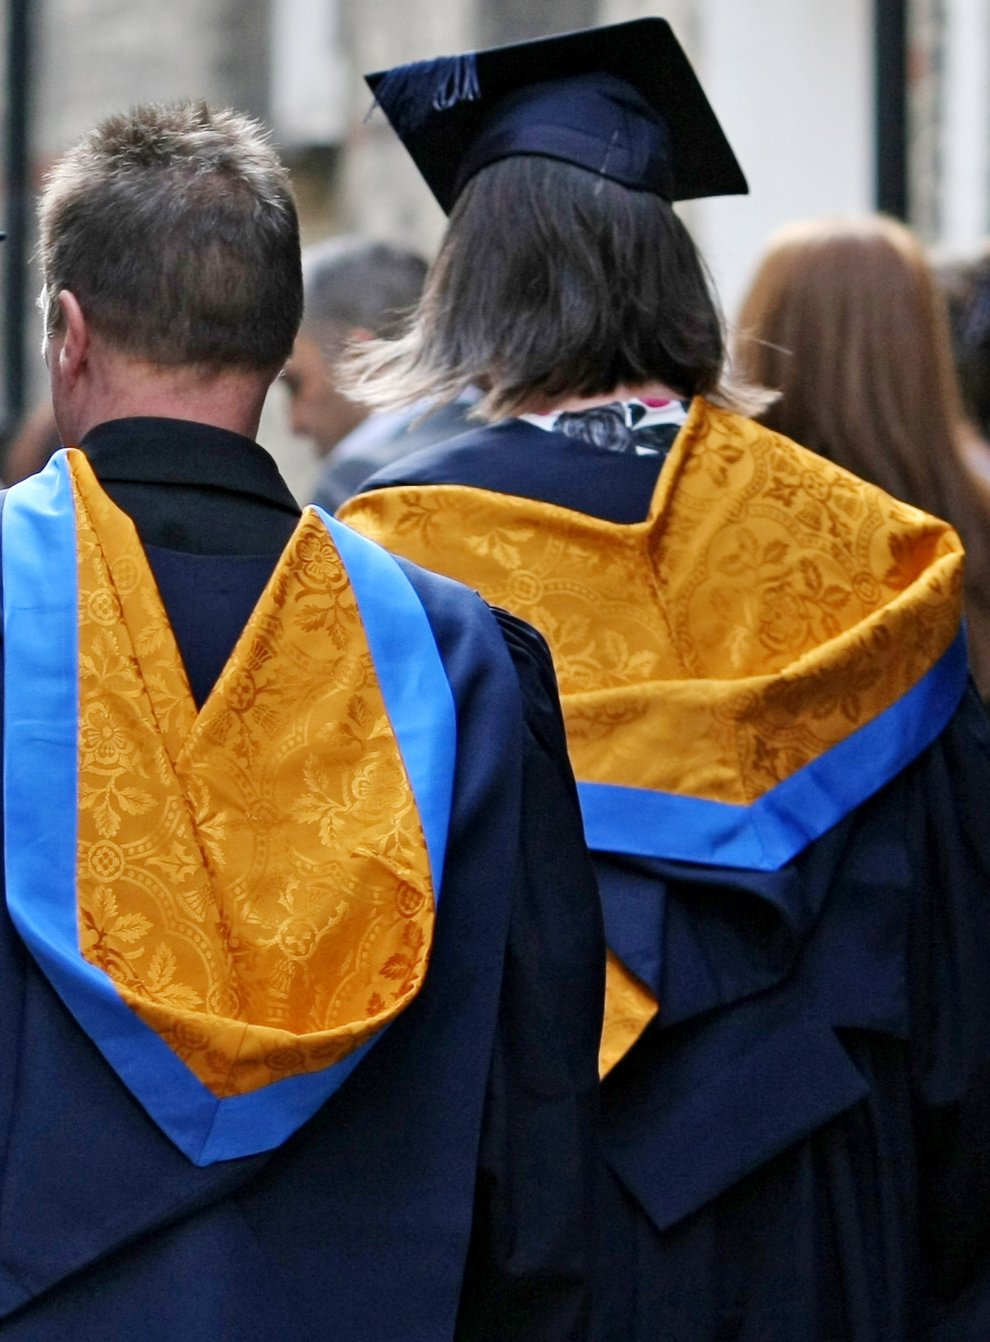 A general view of students wearing mortar boards and gown (Chris Radburn/PA)